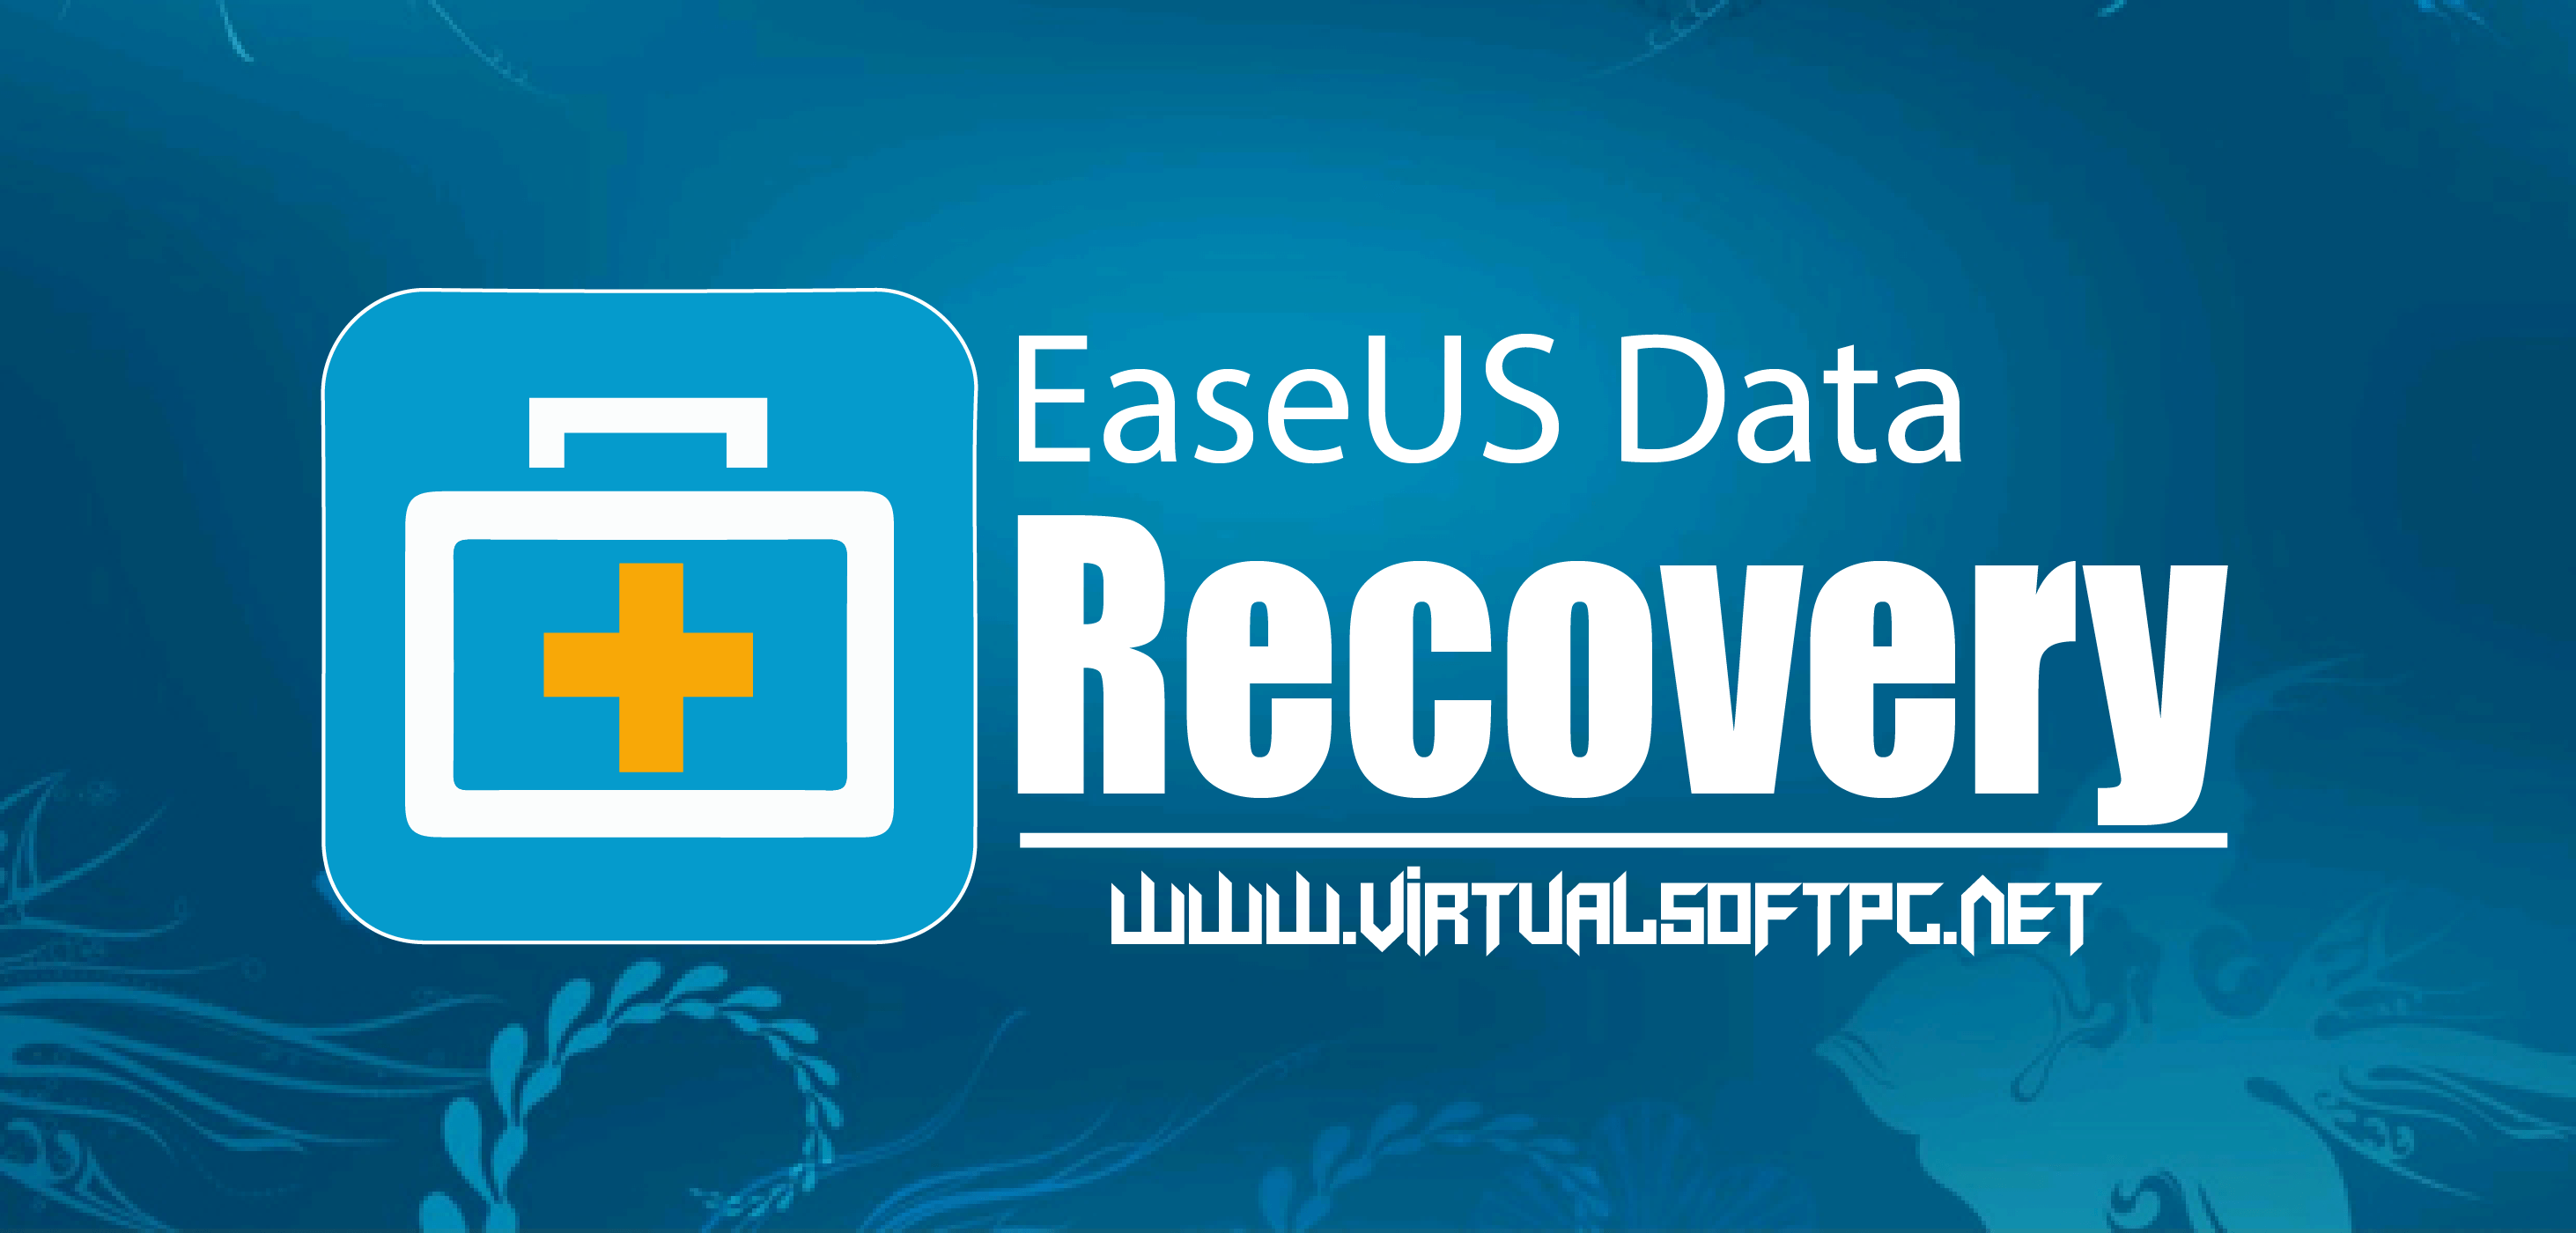 easeus data recovery wizard professional v5 5.1 final full